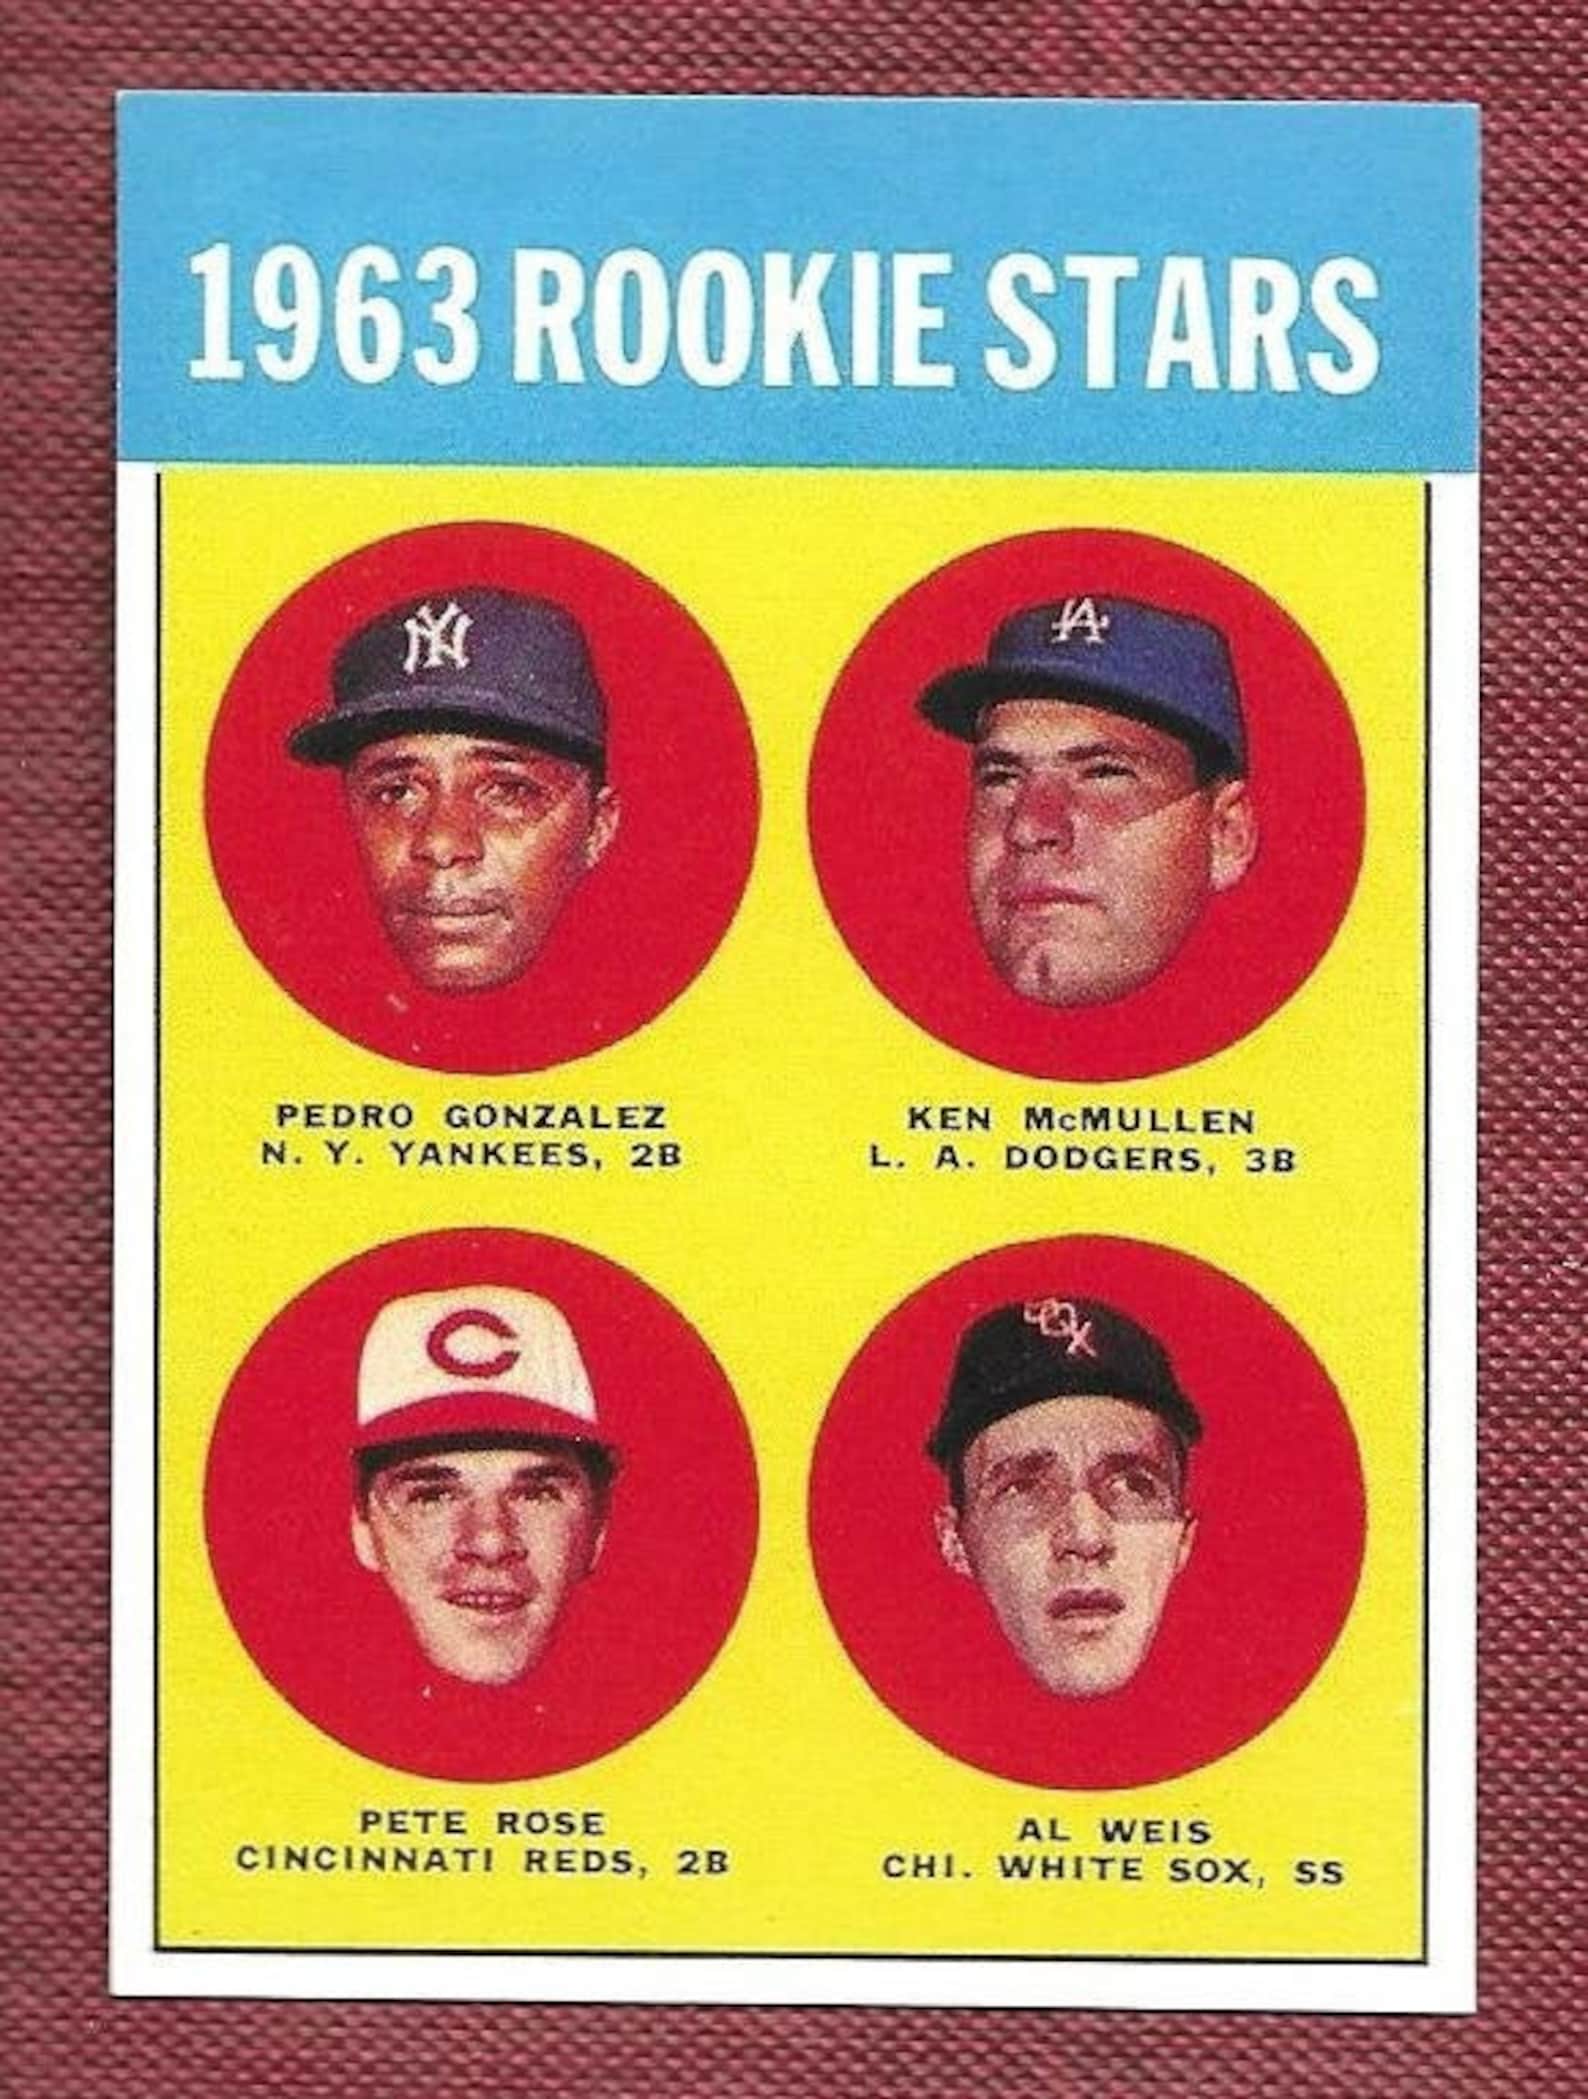 1963 Topps 537 Pete Rose rookie card REPRINT Etsy